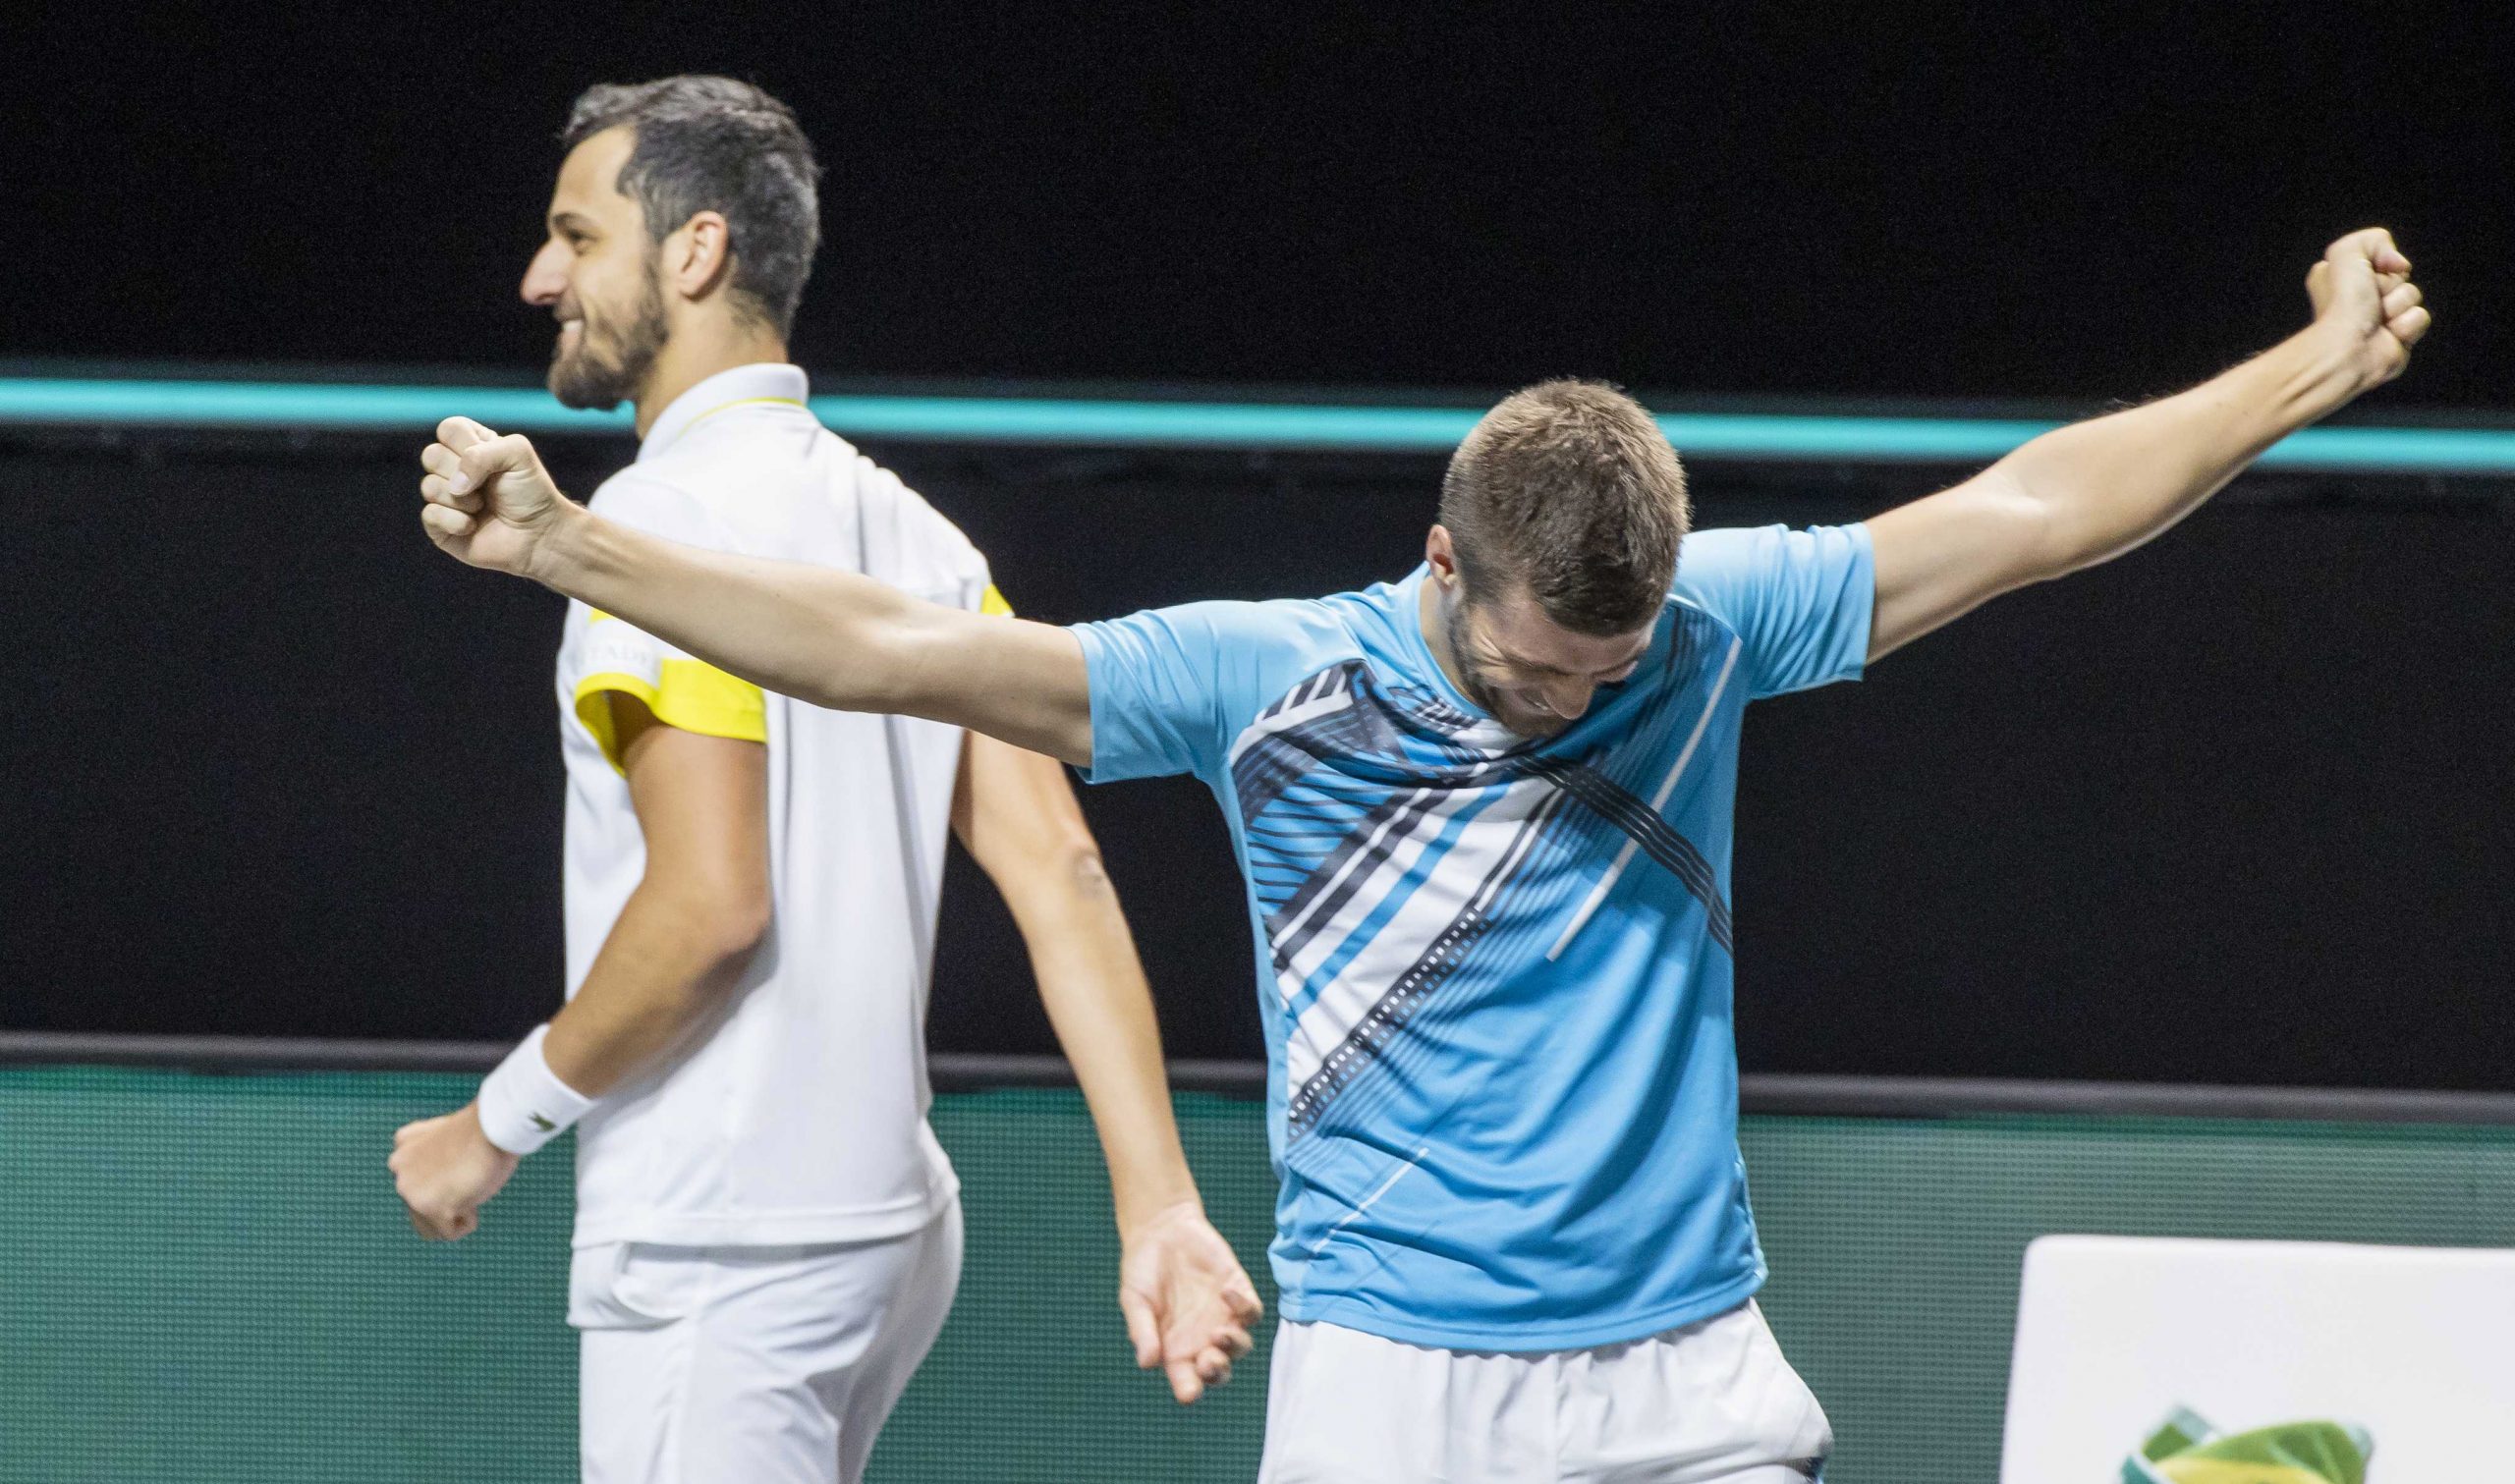 epa09059140 Nicola Mektic and Mate Pavic (L) of Croatia celebrate winning the doubles final against Kevin Krawietz of Germany and Horia Tecau  of Romania at the ABN AMRO World Tennis Tournament in Rotterdam, Netherlands, 07 March 2021.  EPA/Koen Suyk